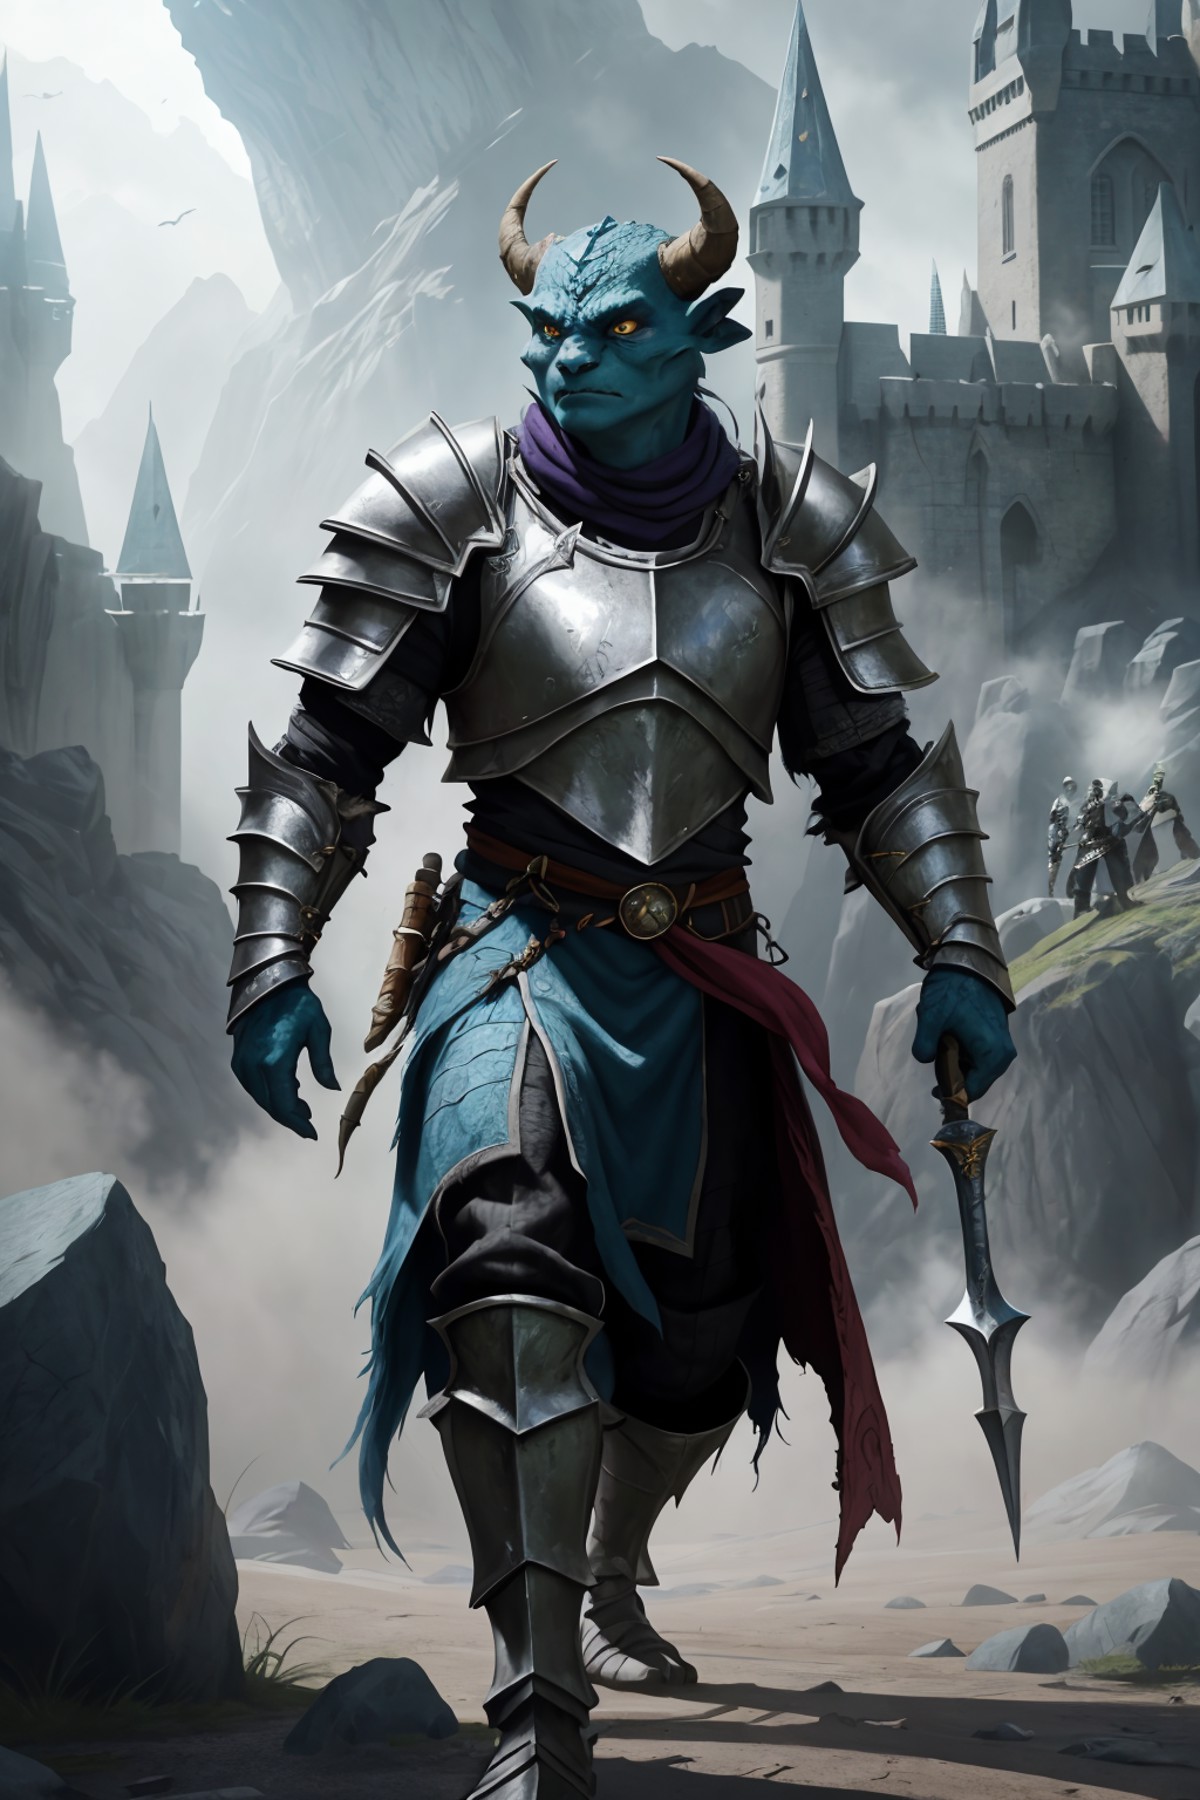 dungeons and dragons epic movie poster dragonborn wearing plate armor marching into battle (windy dust debris storm:1.1) v...